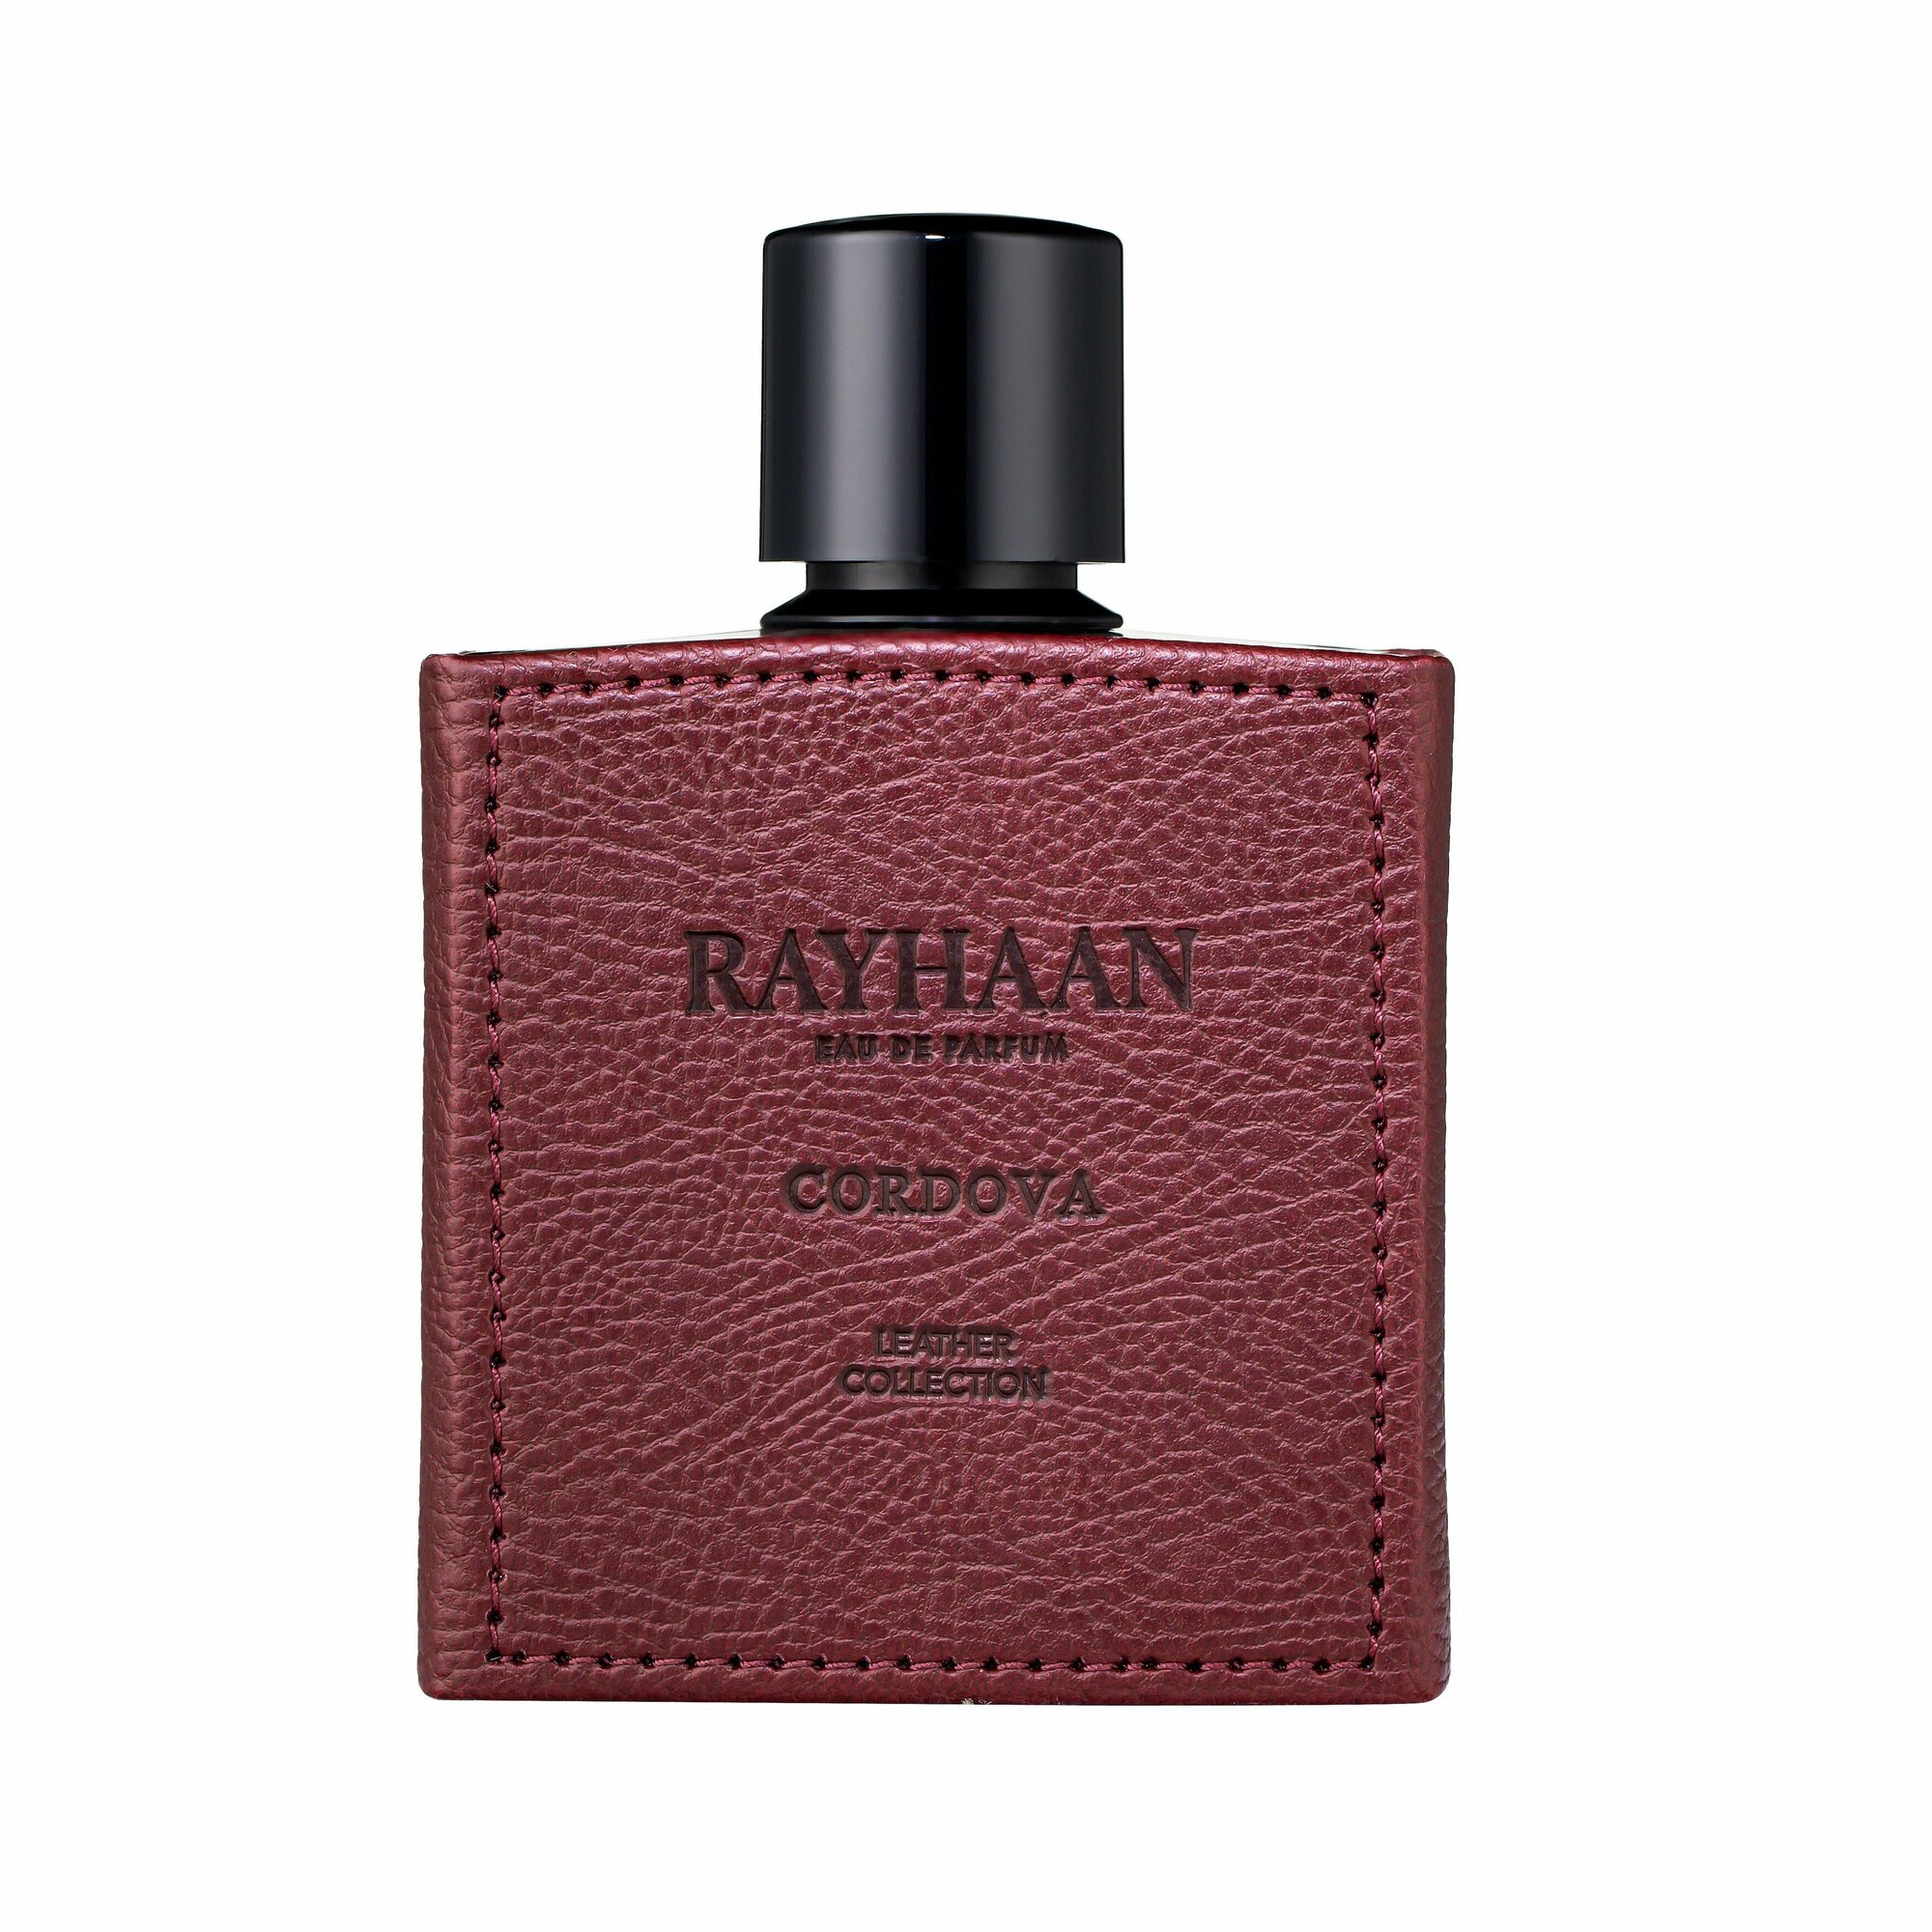 Rayhaan The Leather Collection Парфюмерная вода cordova 100 мл